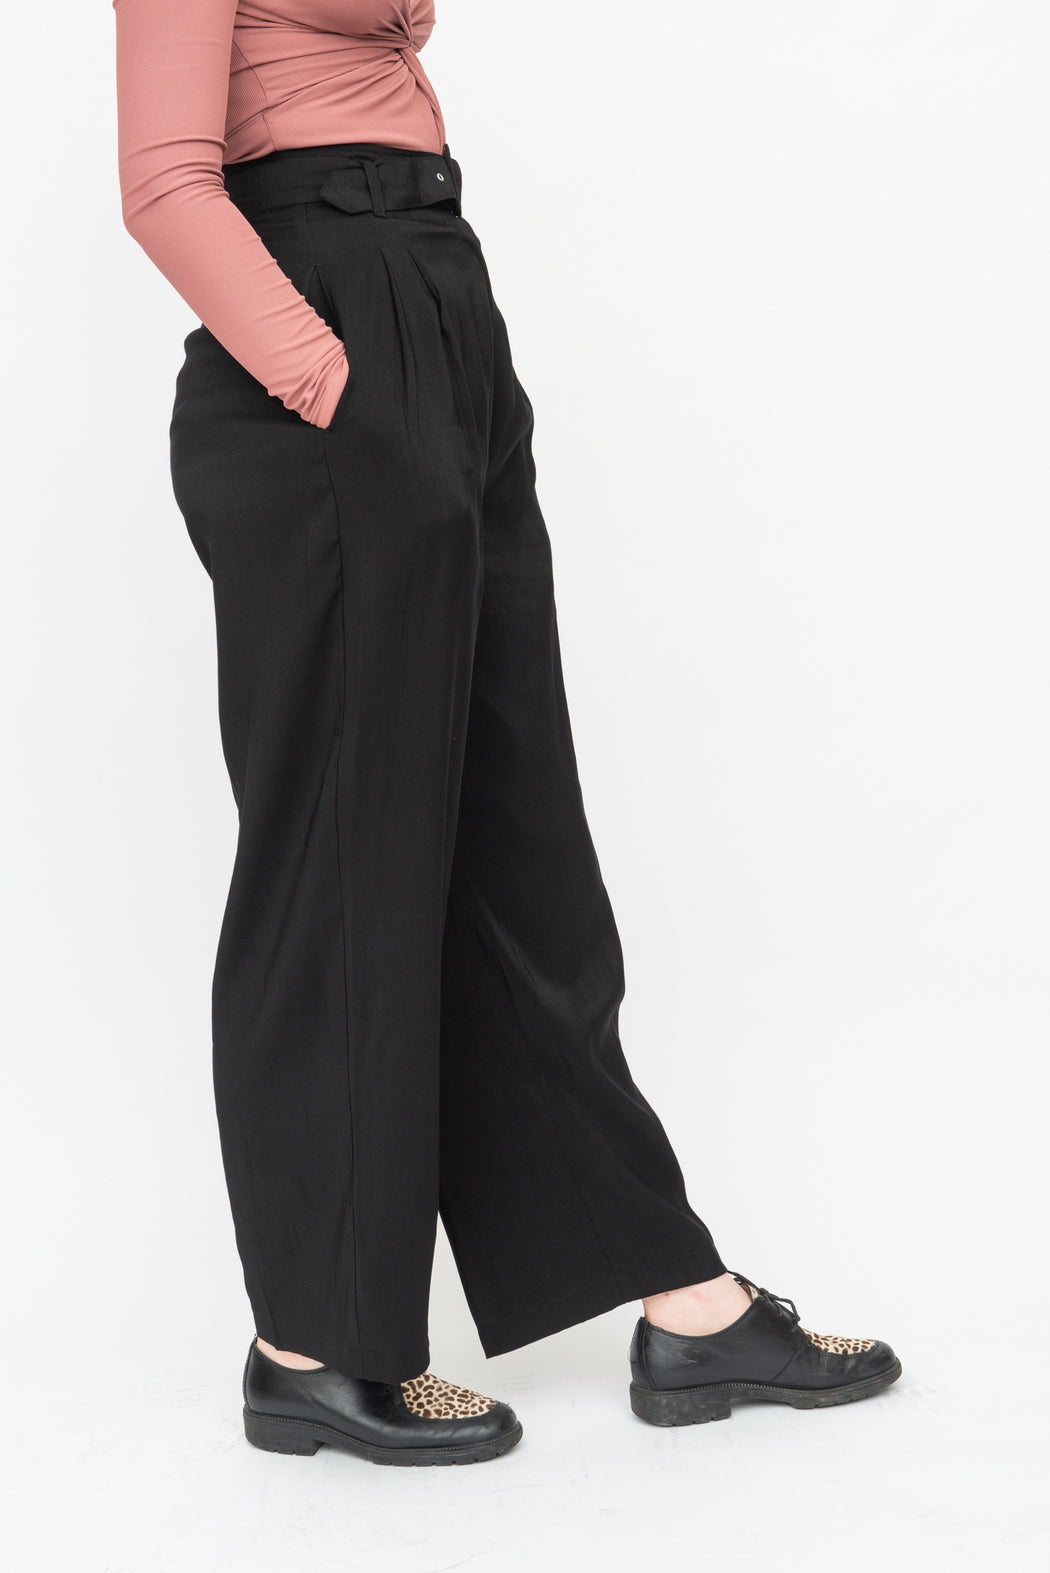 Vintage 80s Black Belted Trousers/ 1980s High Waisted Wide Leg